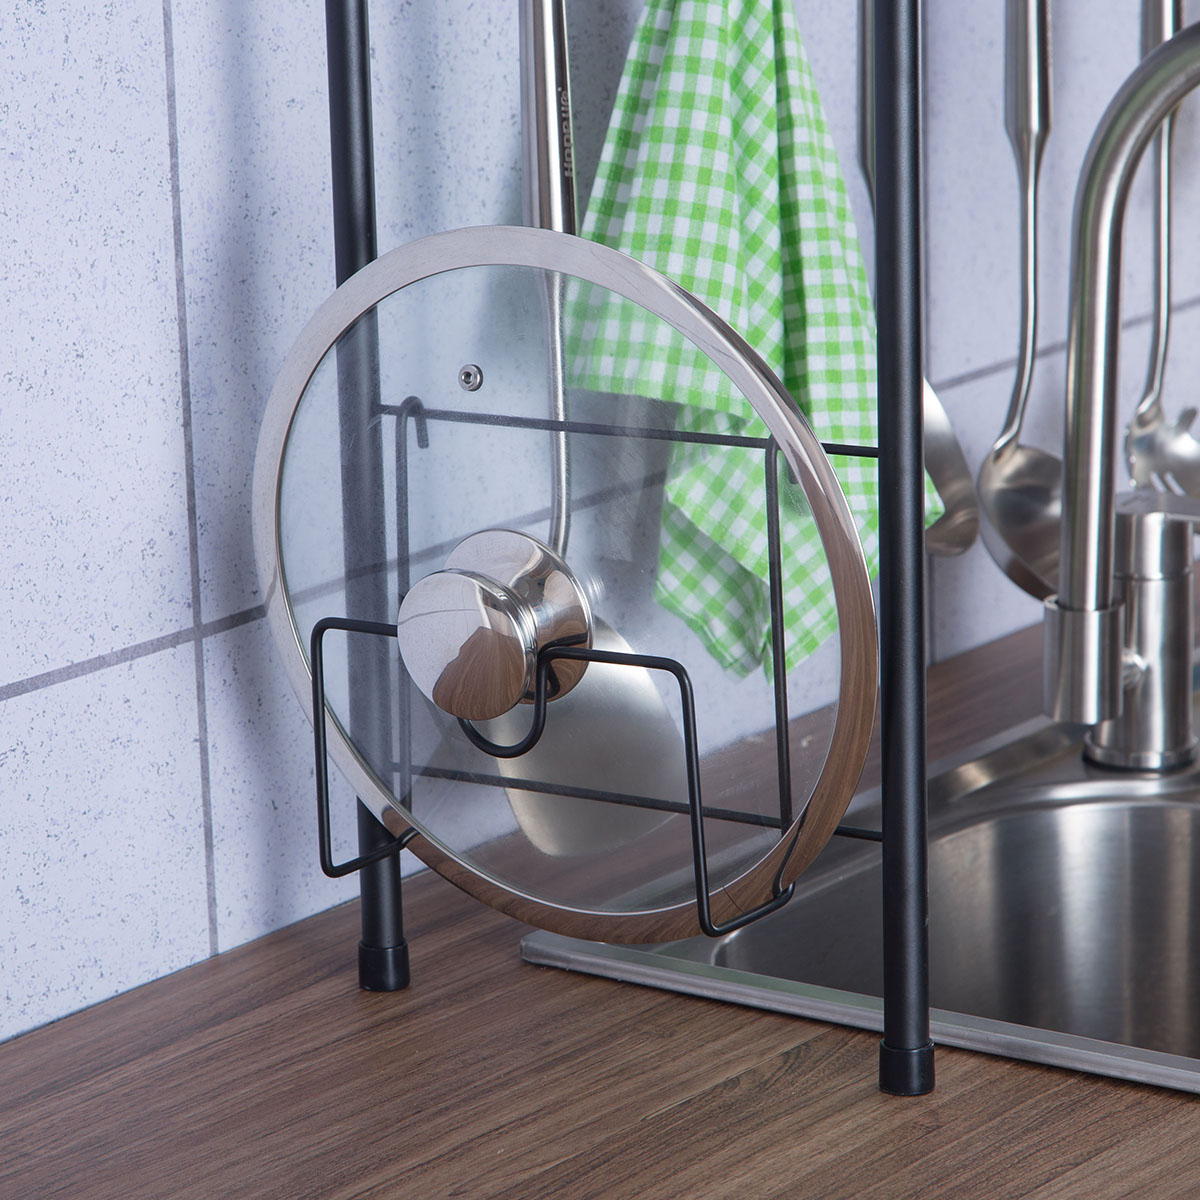 Double-Layer-Shelf-Dish-Stainless-Holder-Steel-Sink-Drain-Rack-Kitchen-Cutlery-Drying-Drainer-Kitche-1566519-5